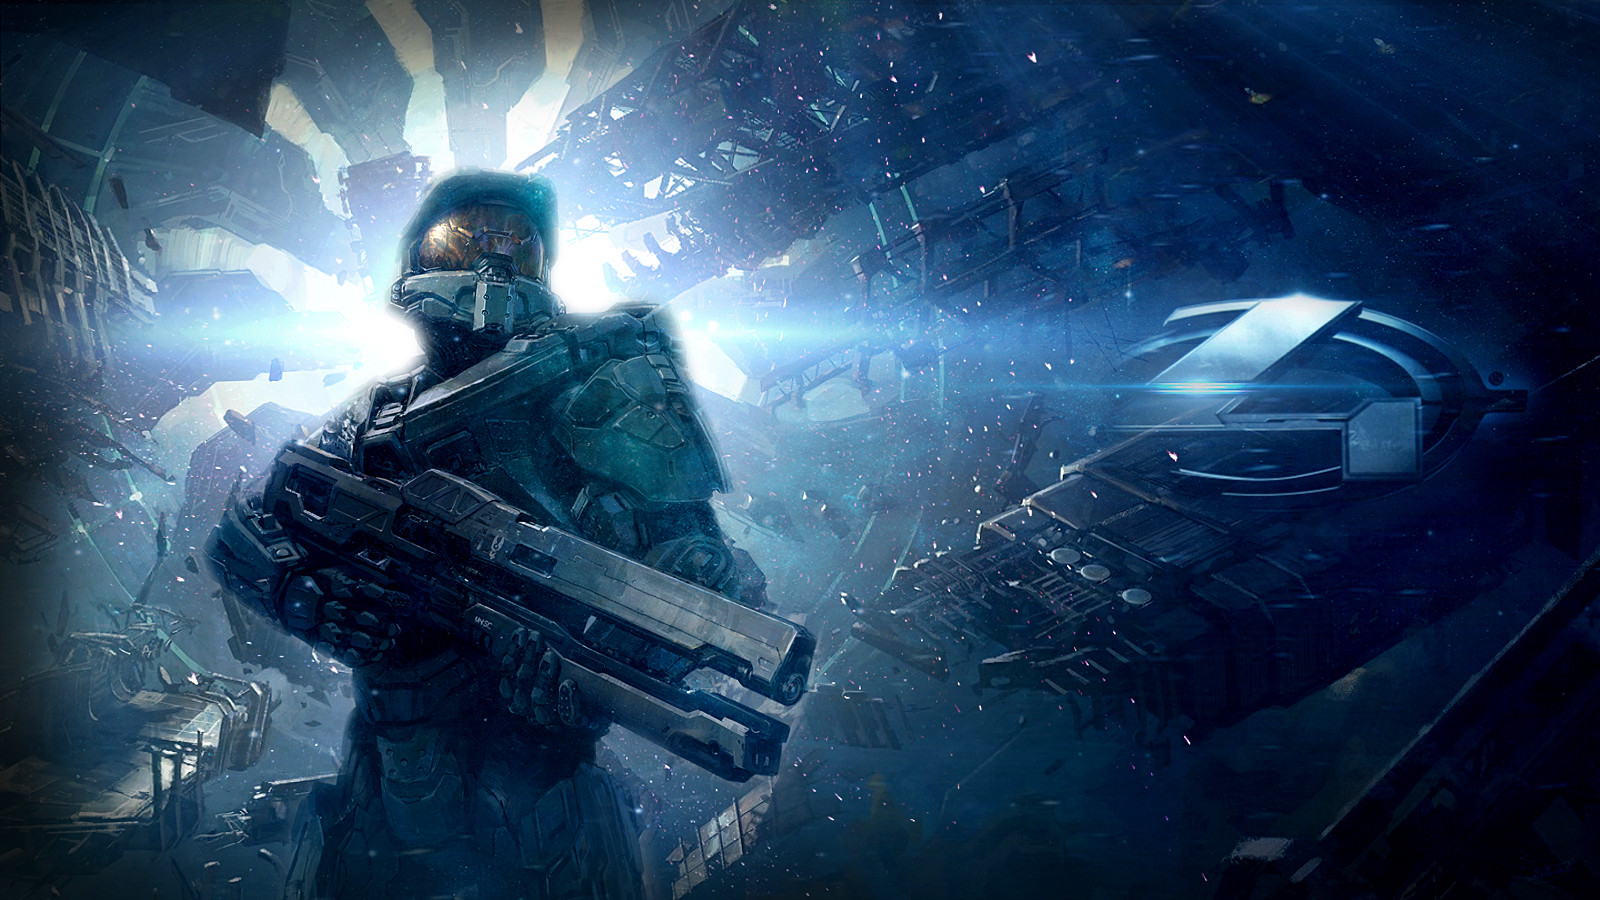 Made Another Halo Wallpaper For R I